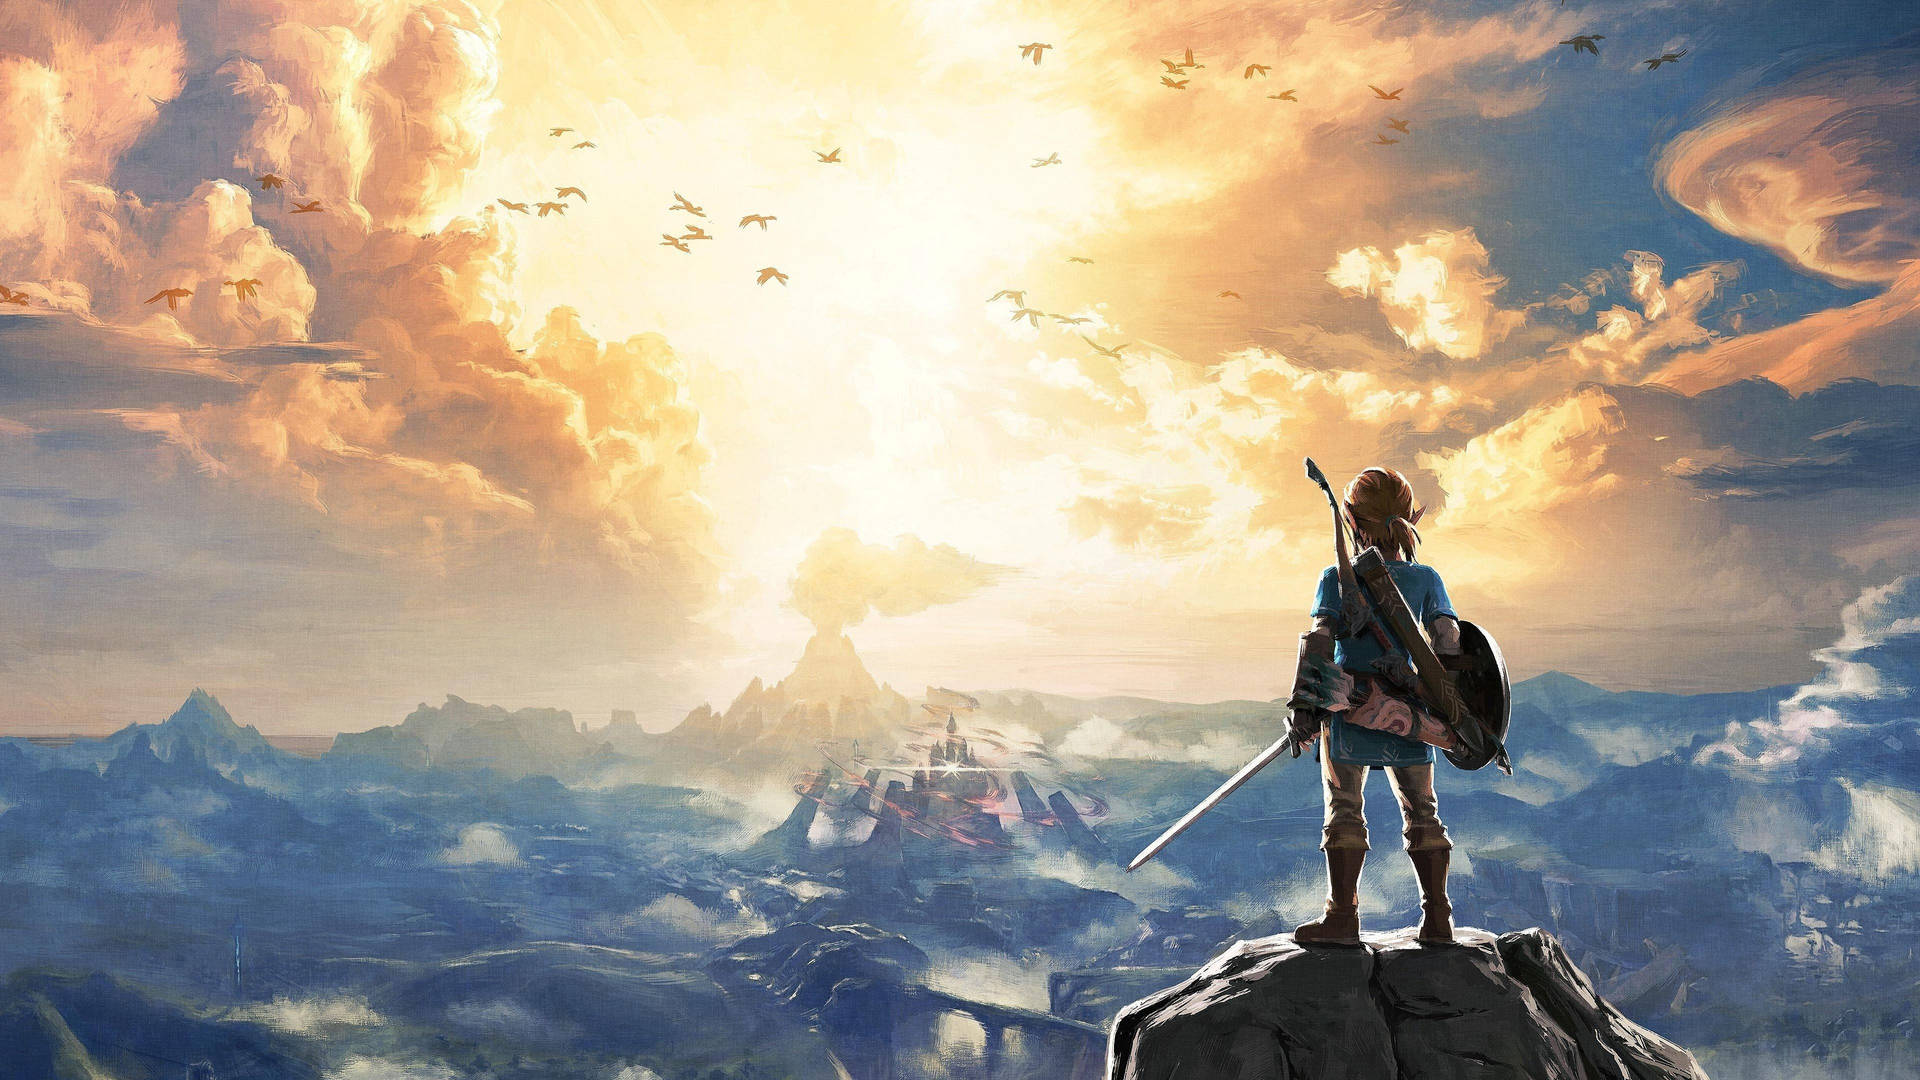 Link exploring the beautiful world of the Breath of the Wild Wallpaper